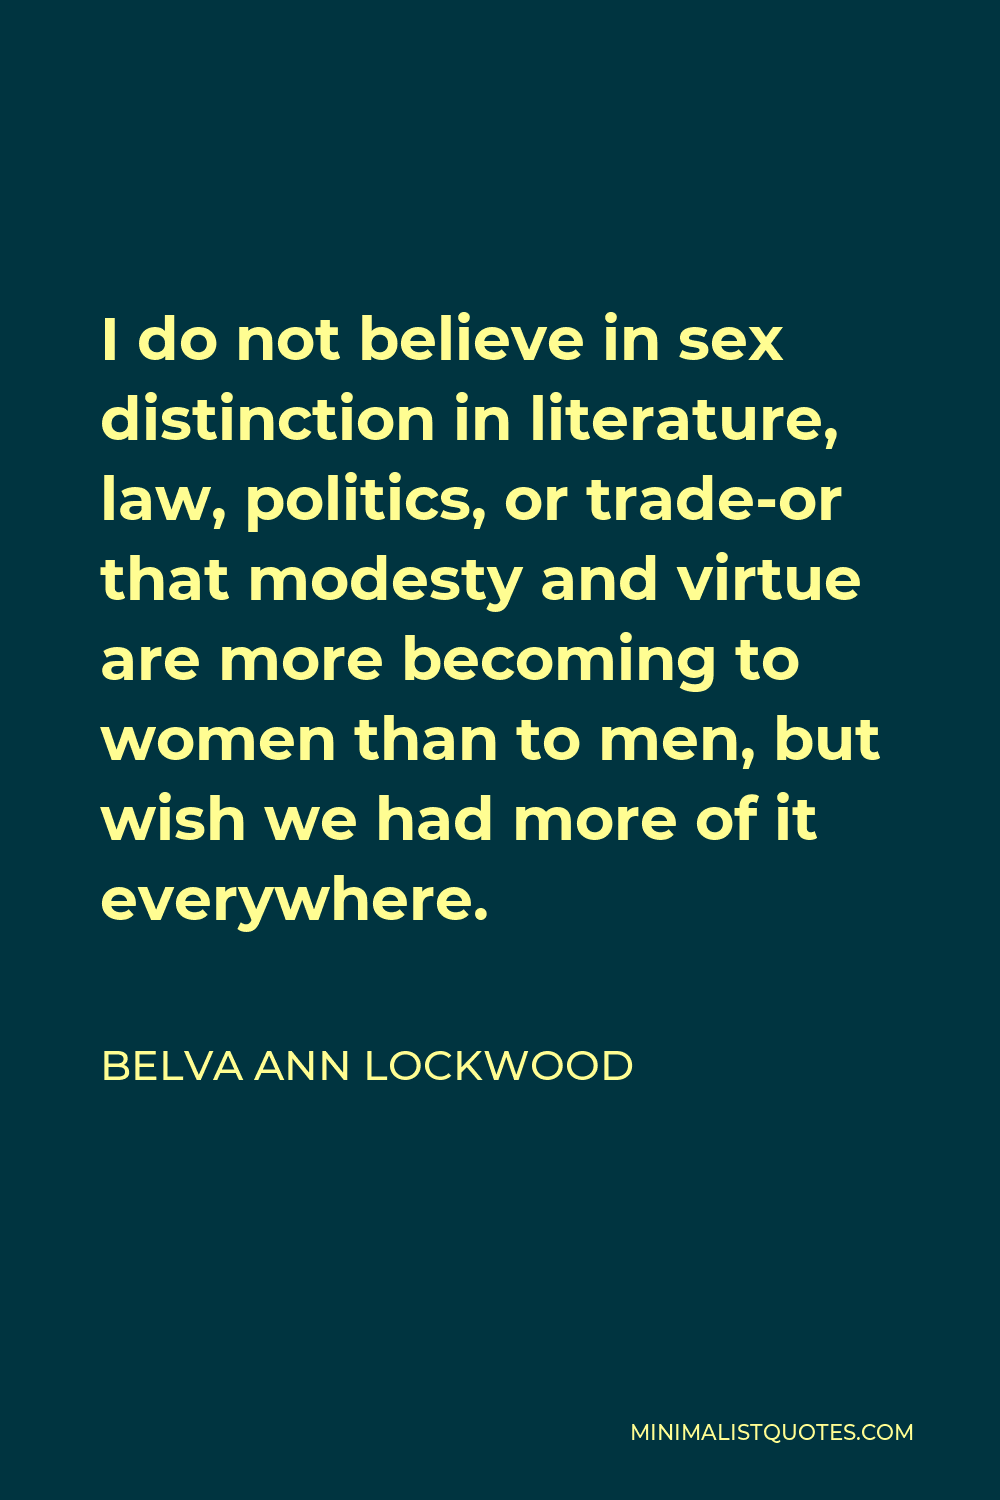 Belva Ann Lockwood Quote - I do not believe in sex distinction in literature, law, politics, or trade-or that modesty and virtue are more becoming to women than to men, but wish we had more of it everywhere.